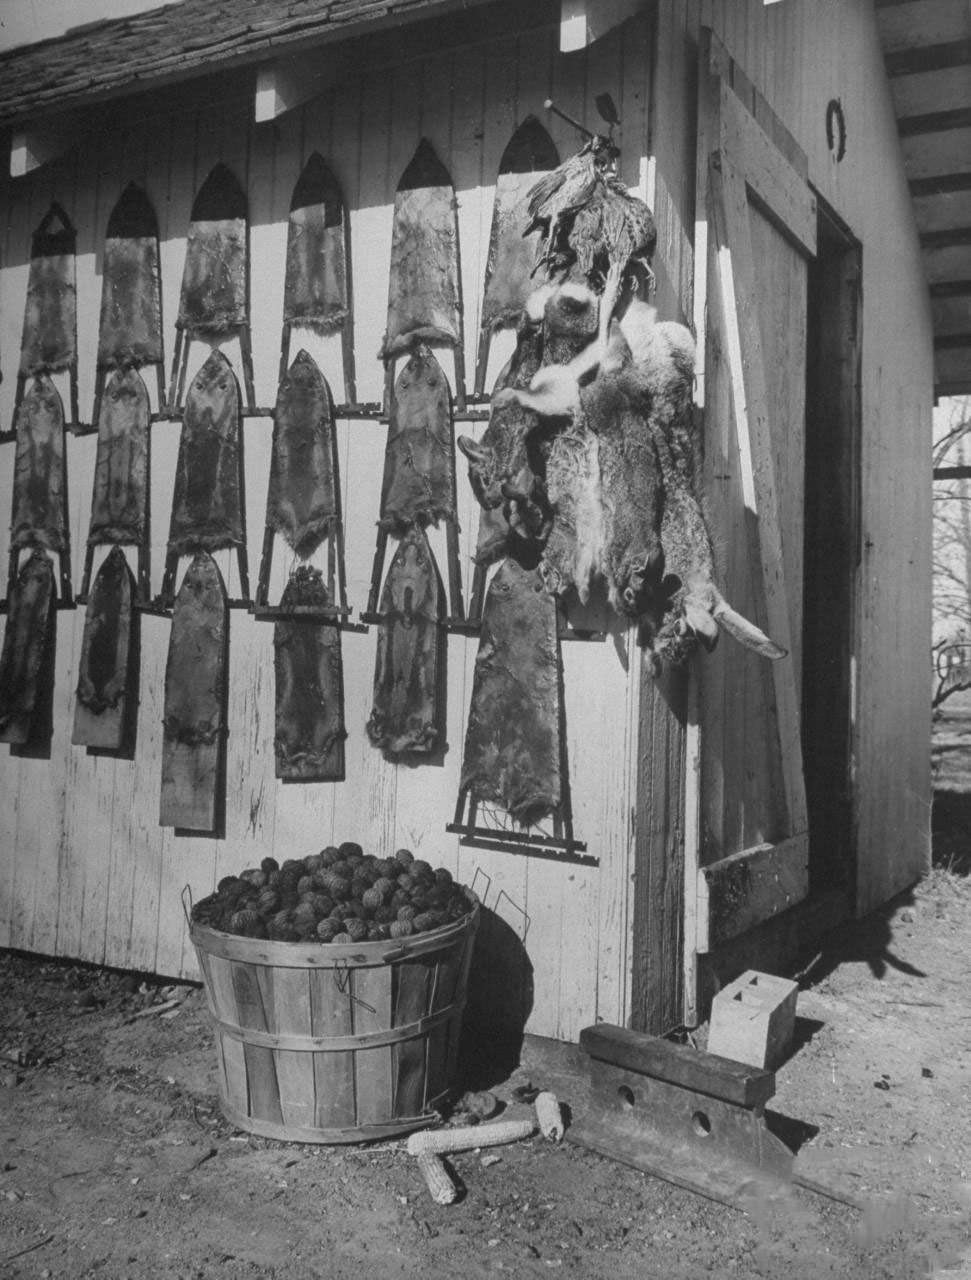 Rabbit skins hanging on wall of tool shed after hunting expedition.